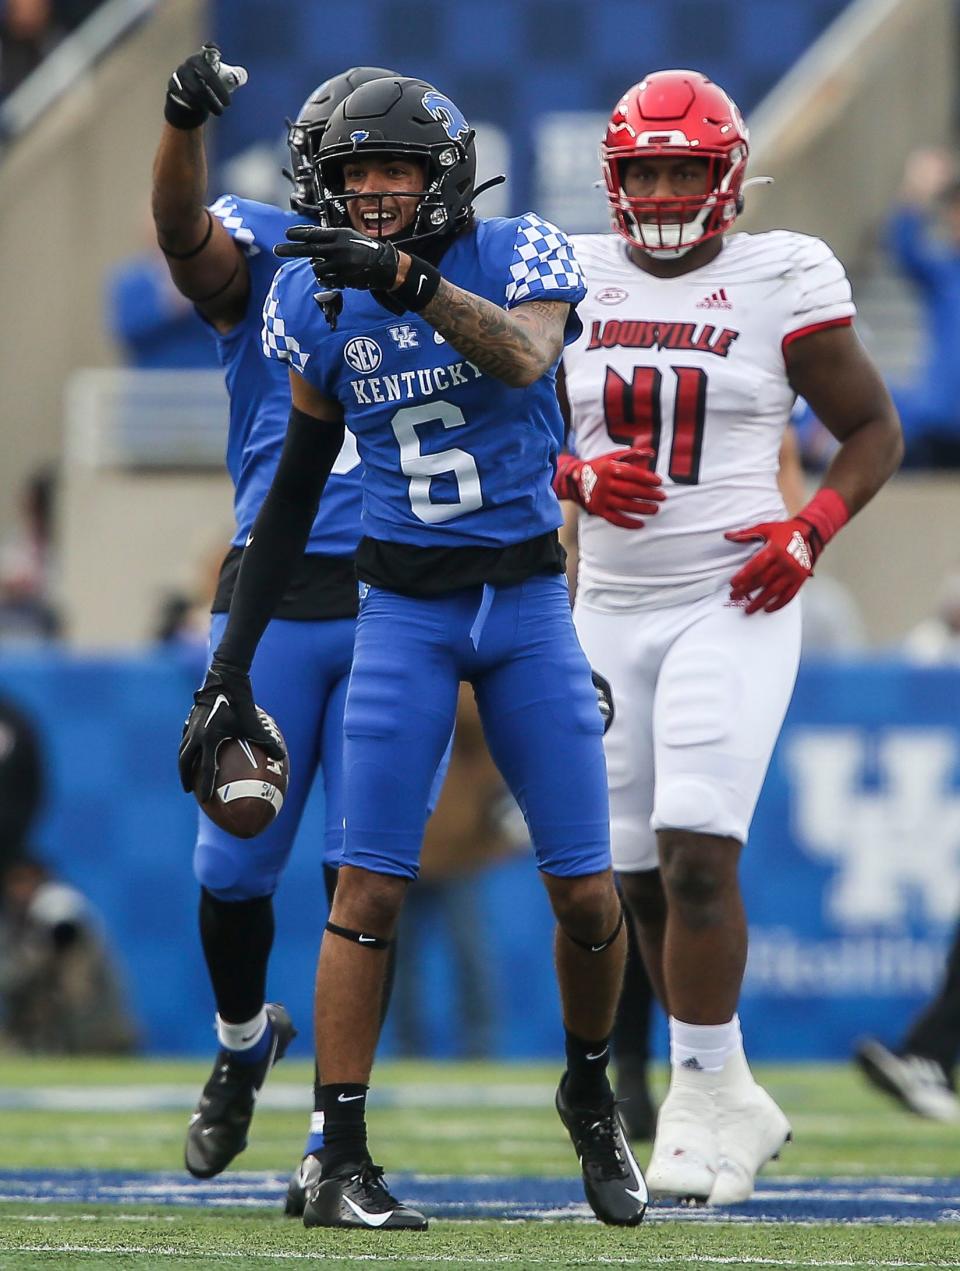 Kentucky wide receiver Dane Key (6) gestures for a first down after making a reception for a gain in the Governor's Cup game against Louisville. Nov. 26, 2022